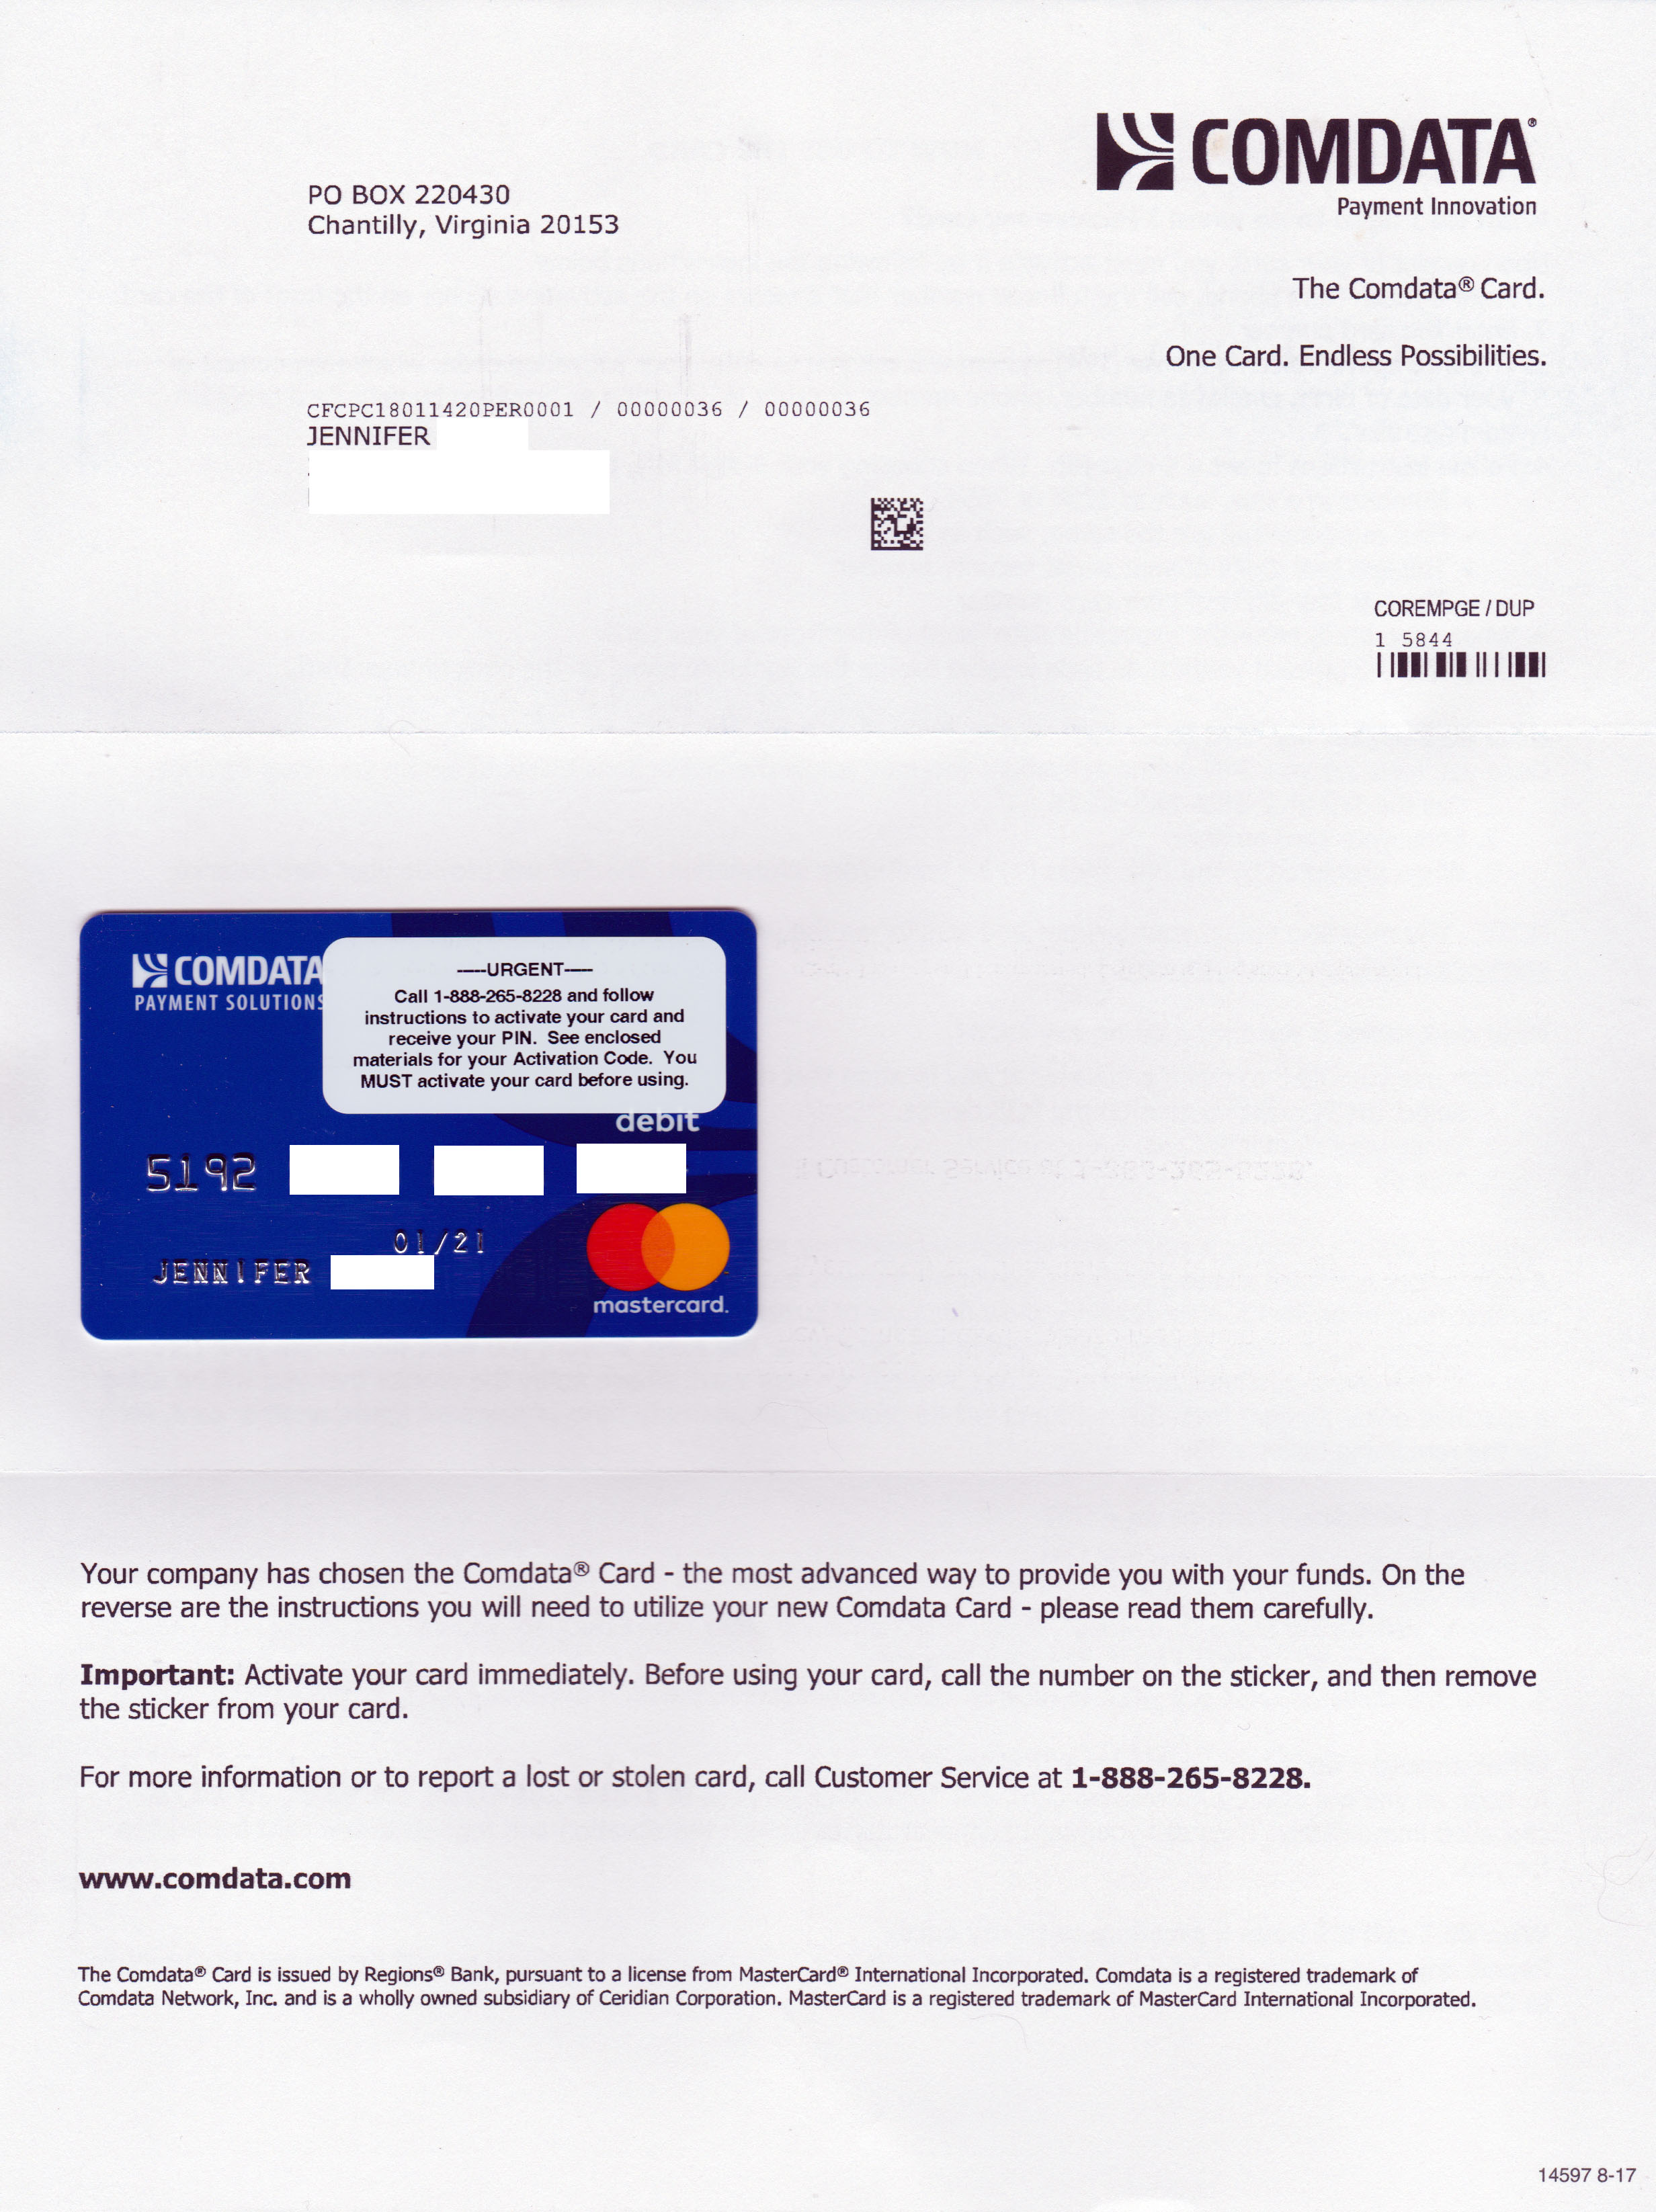 Fake Master Card Attached to Welcome Letter